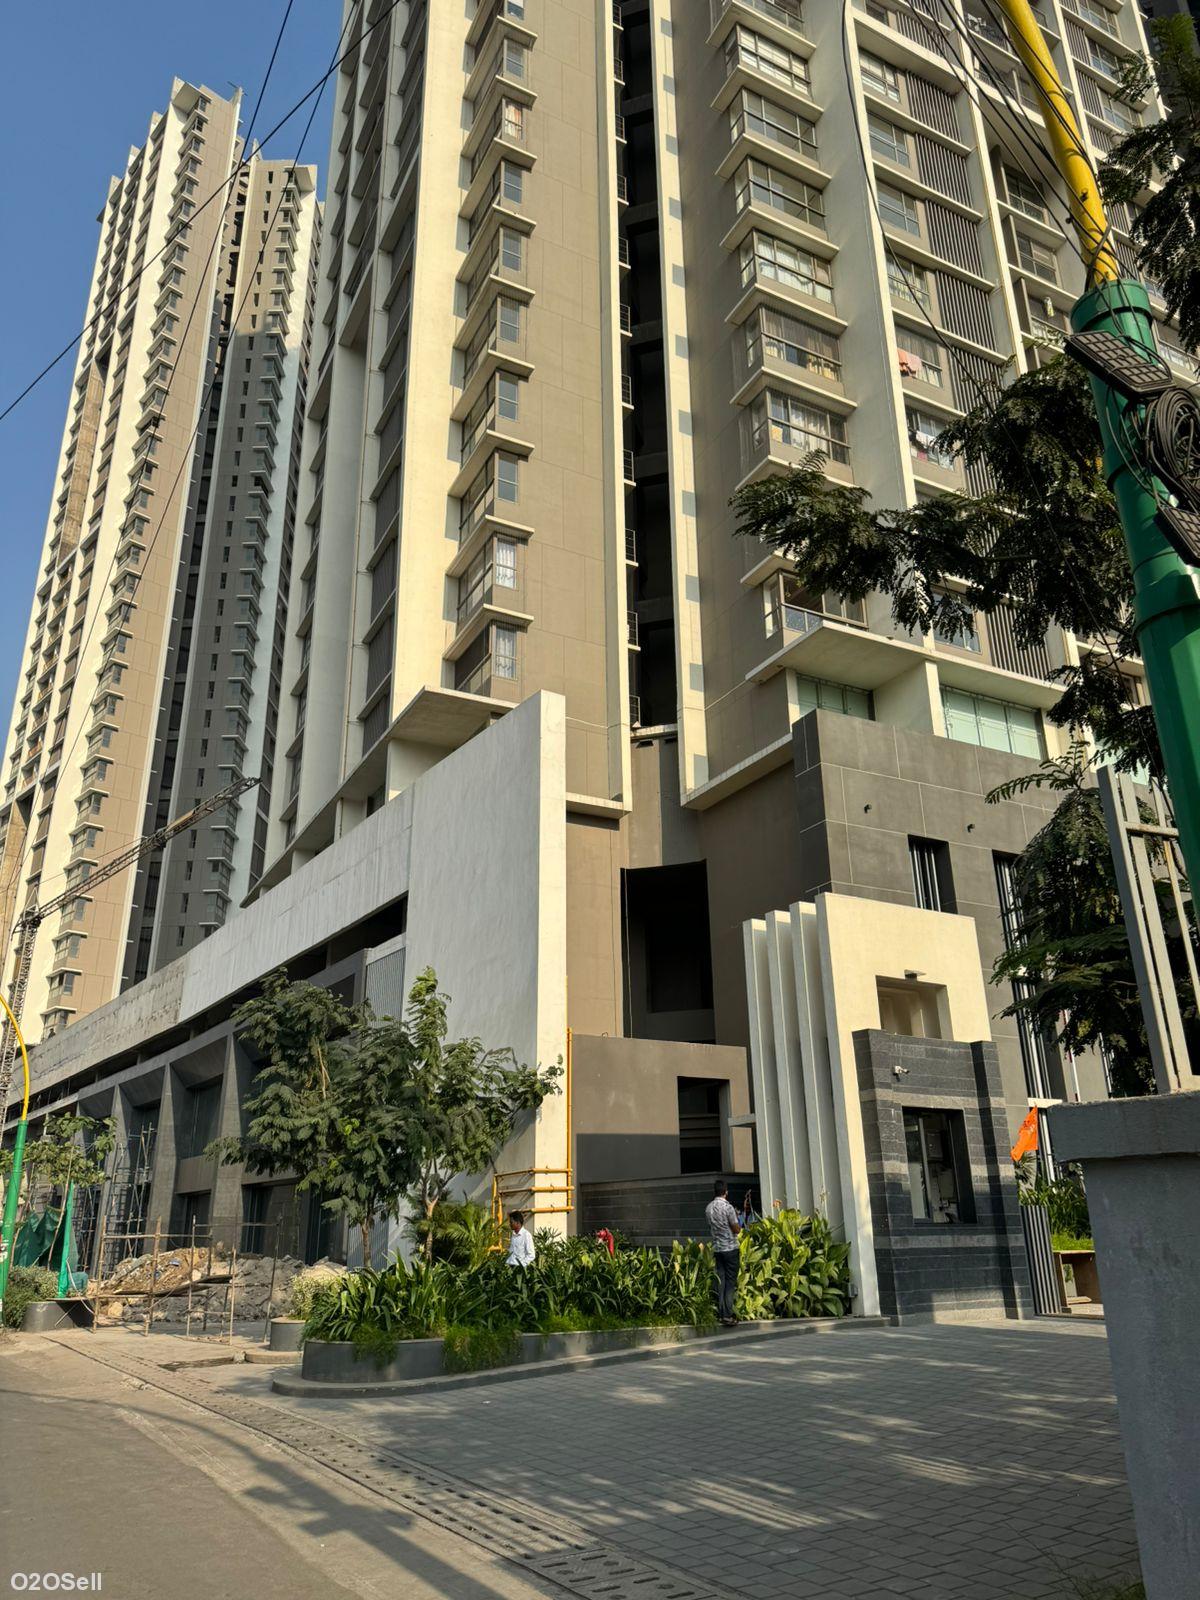  Heaven Homes: PG in Thane - Profile Image